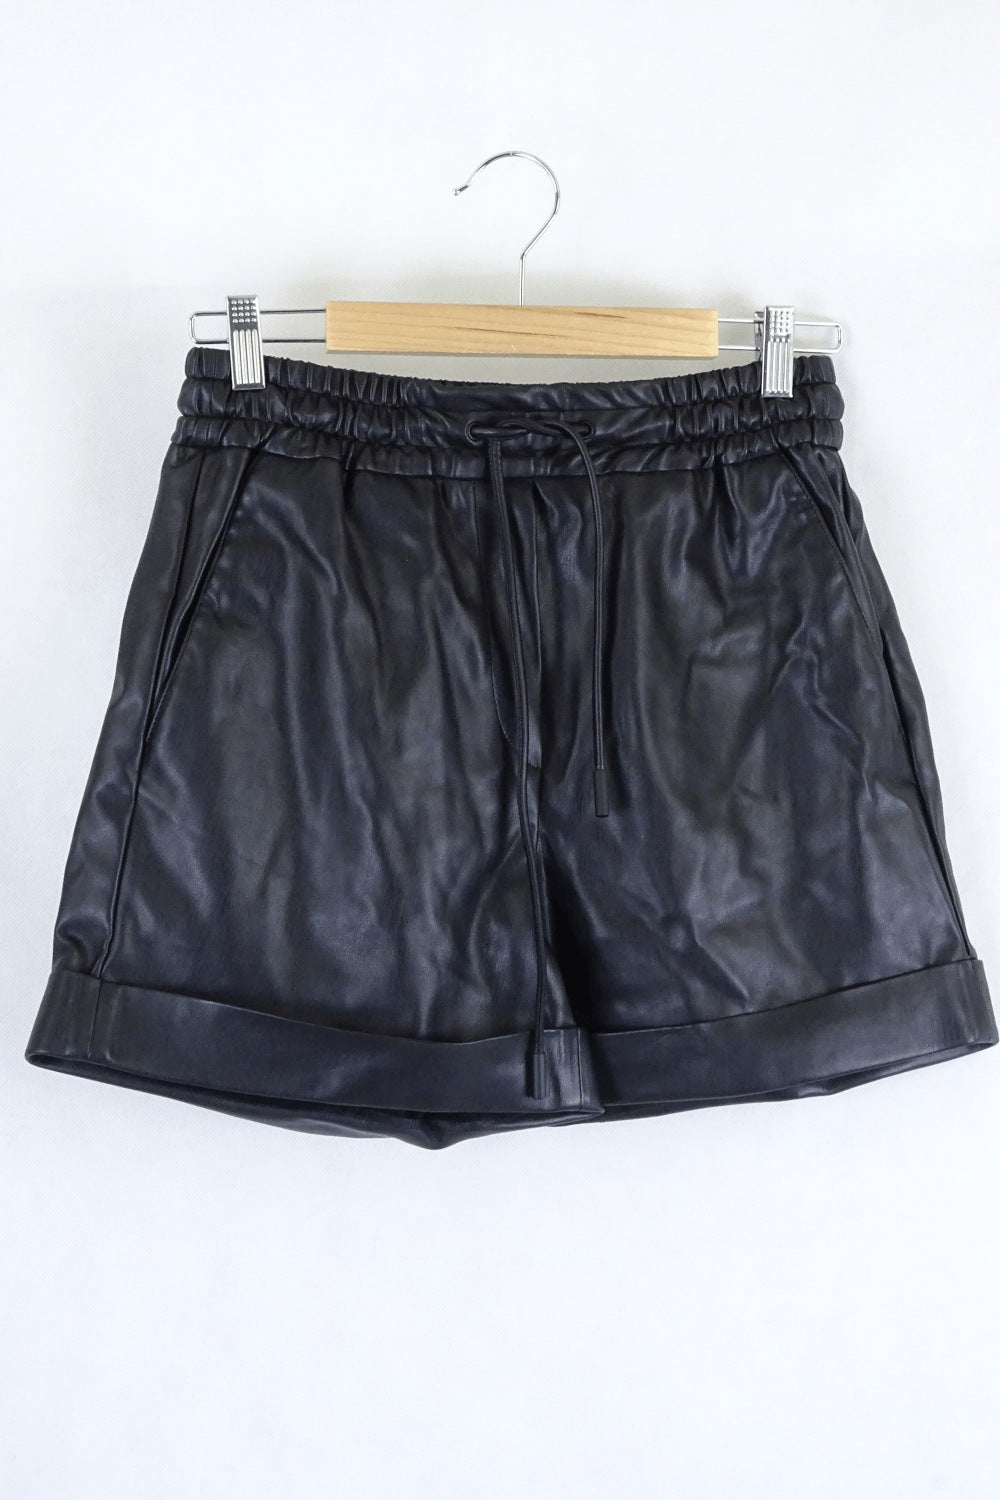 Country Road Black Faux Leather Shorts 8